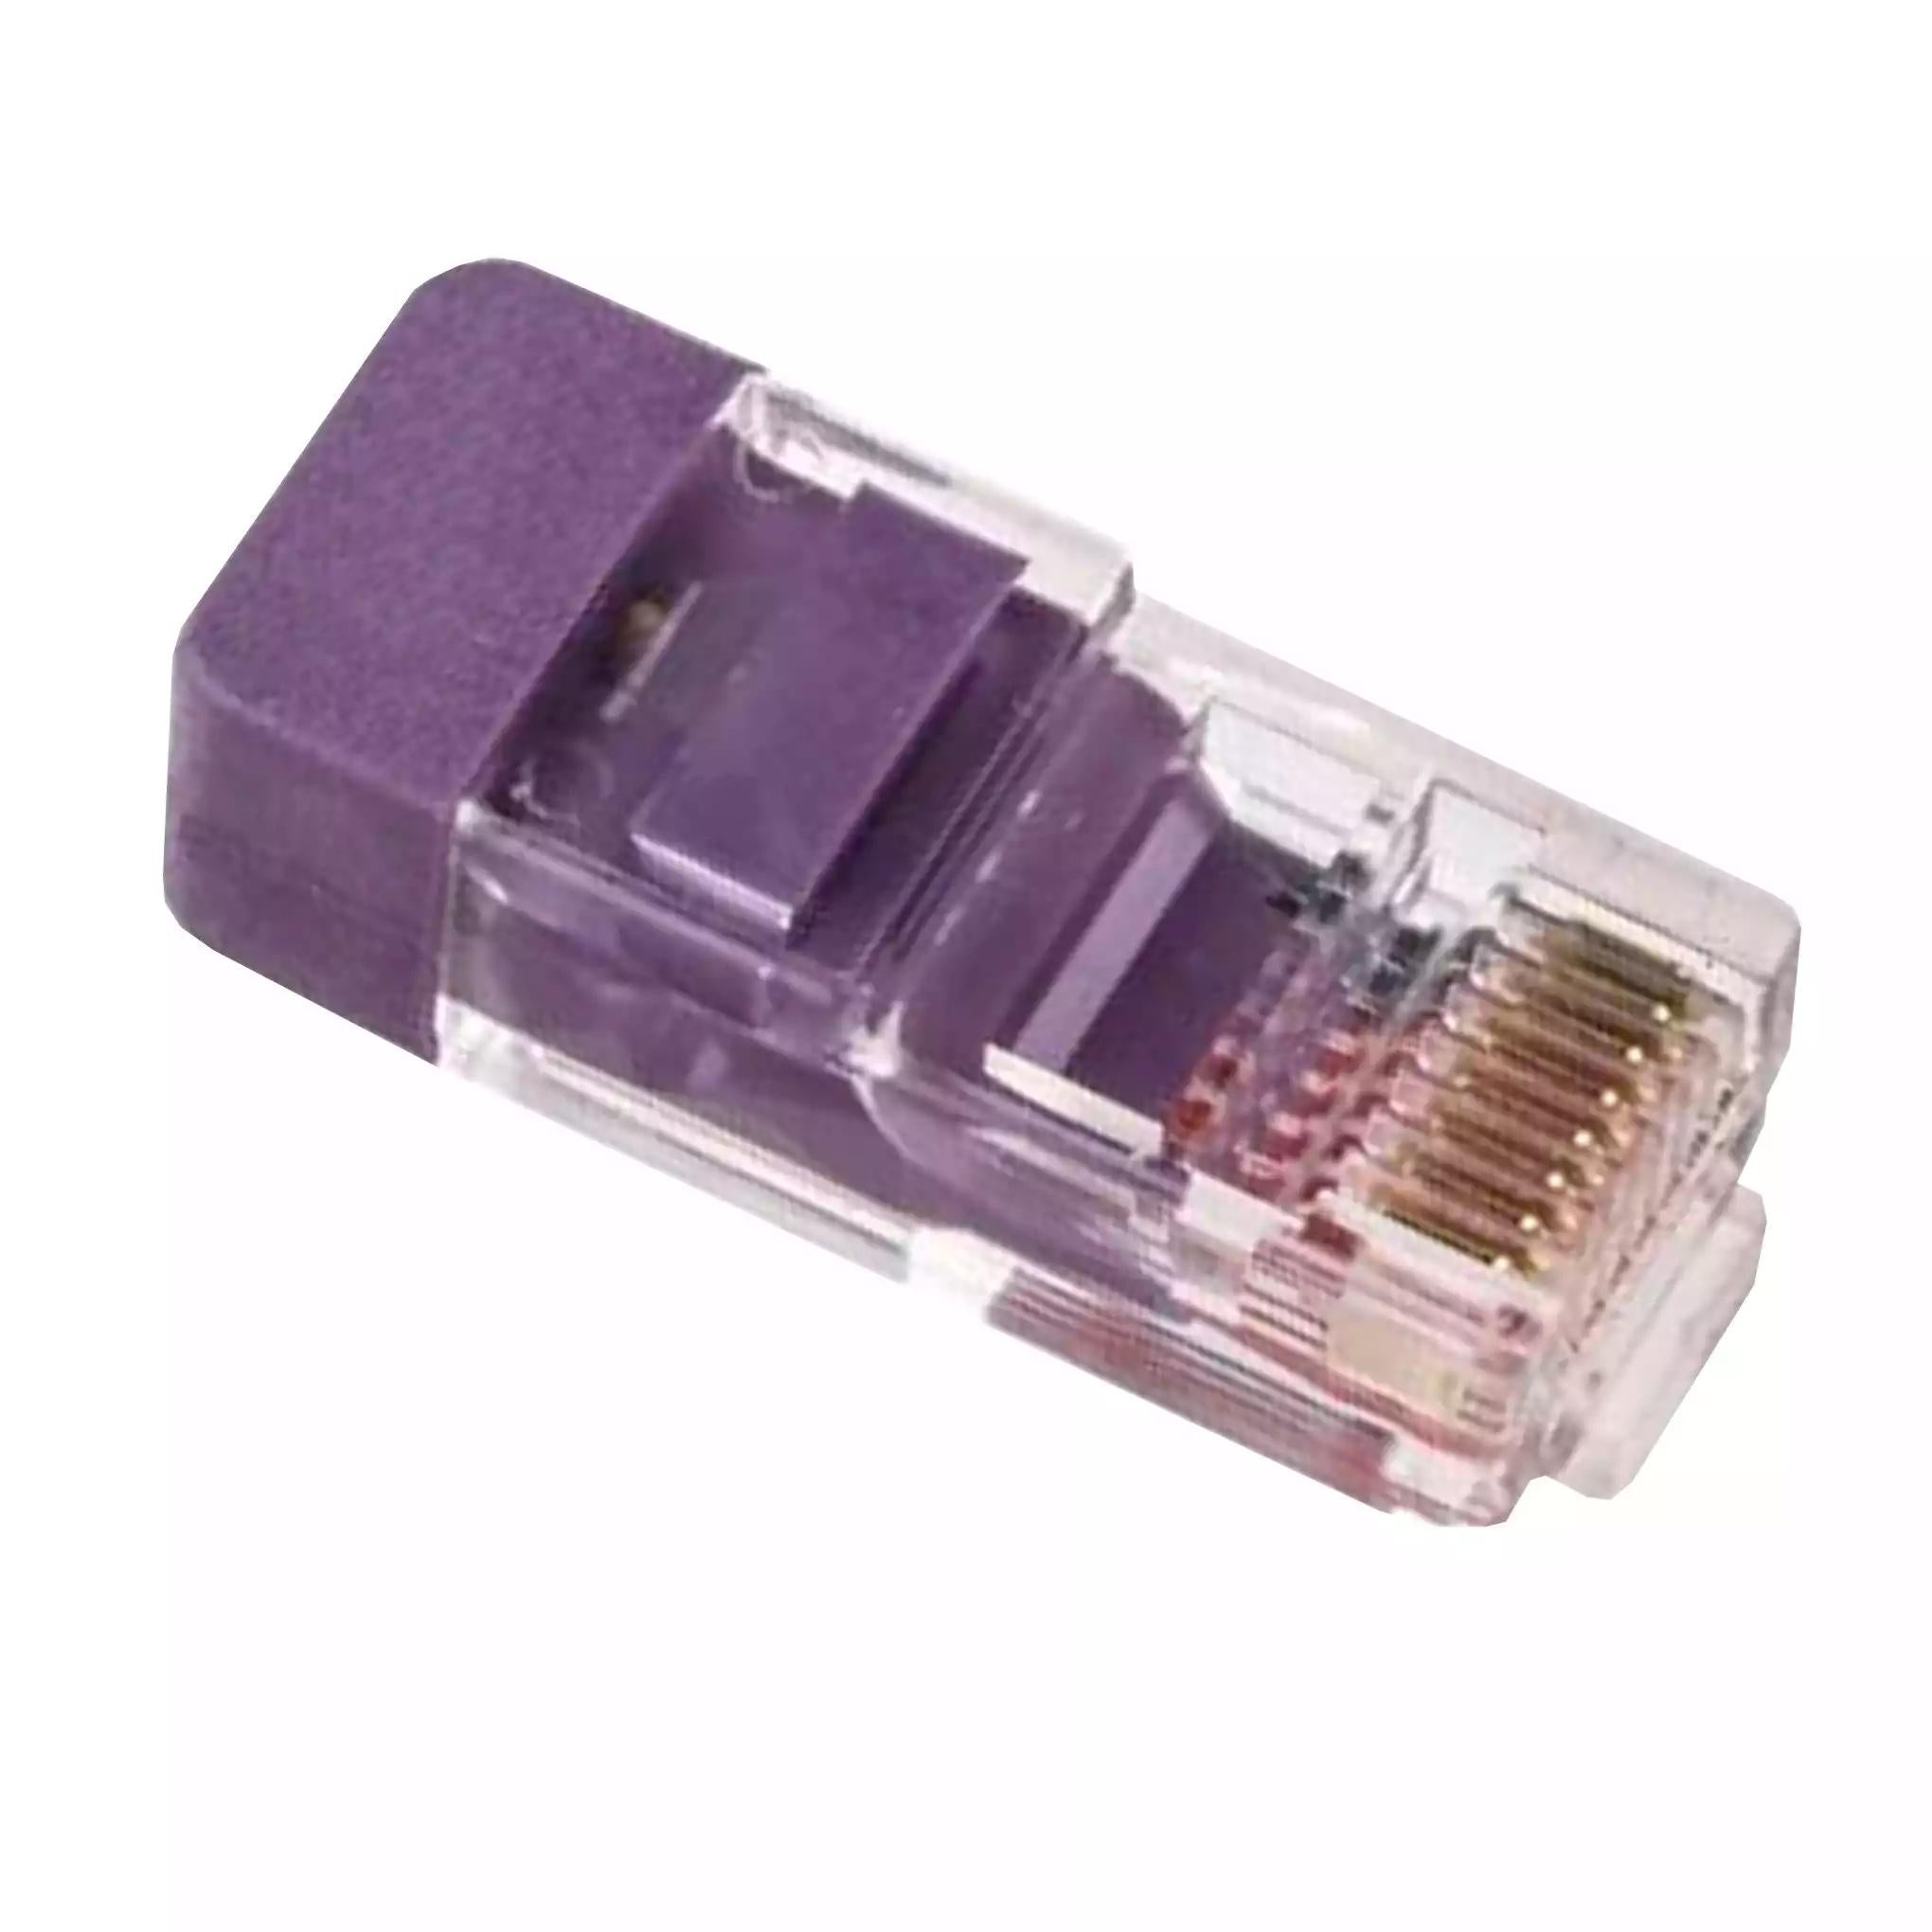 Modbus line terminator - for end of RS485 line - RJ45 connector